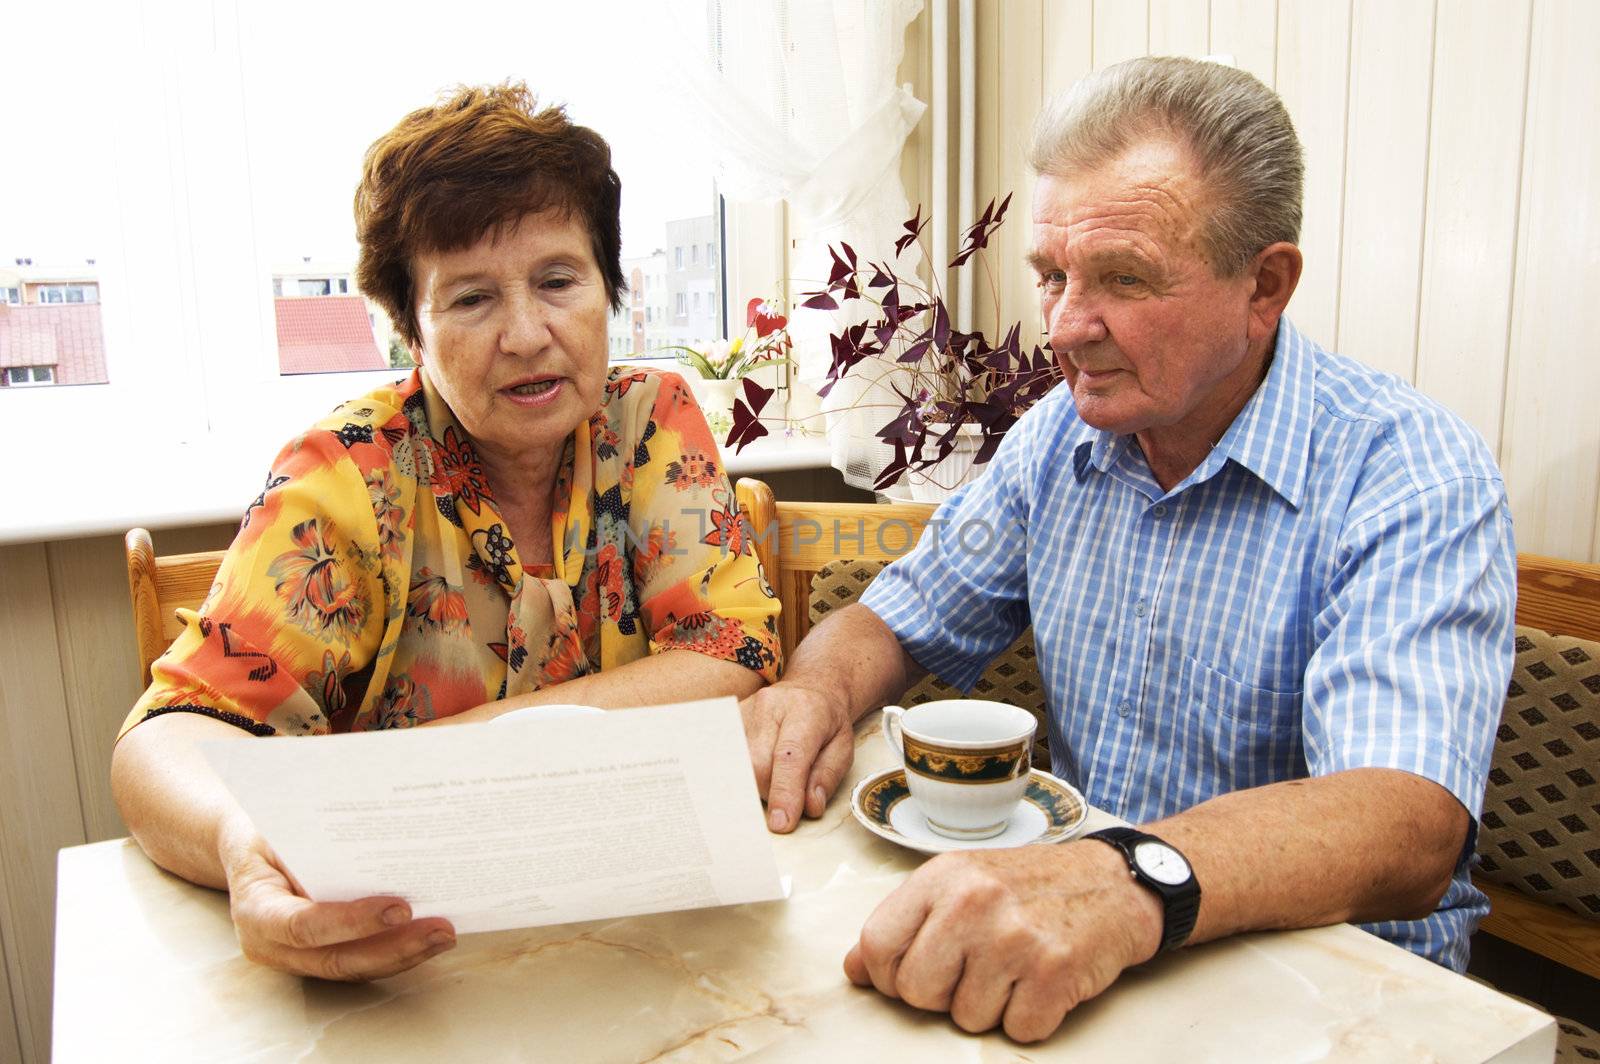 Senior couple studying document together in home